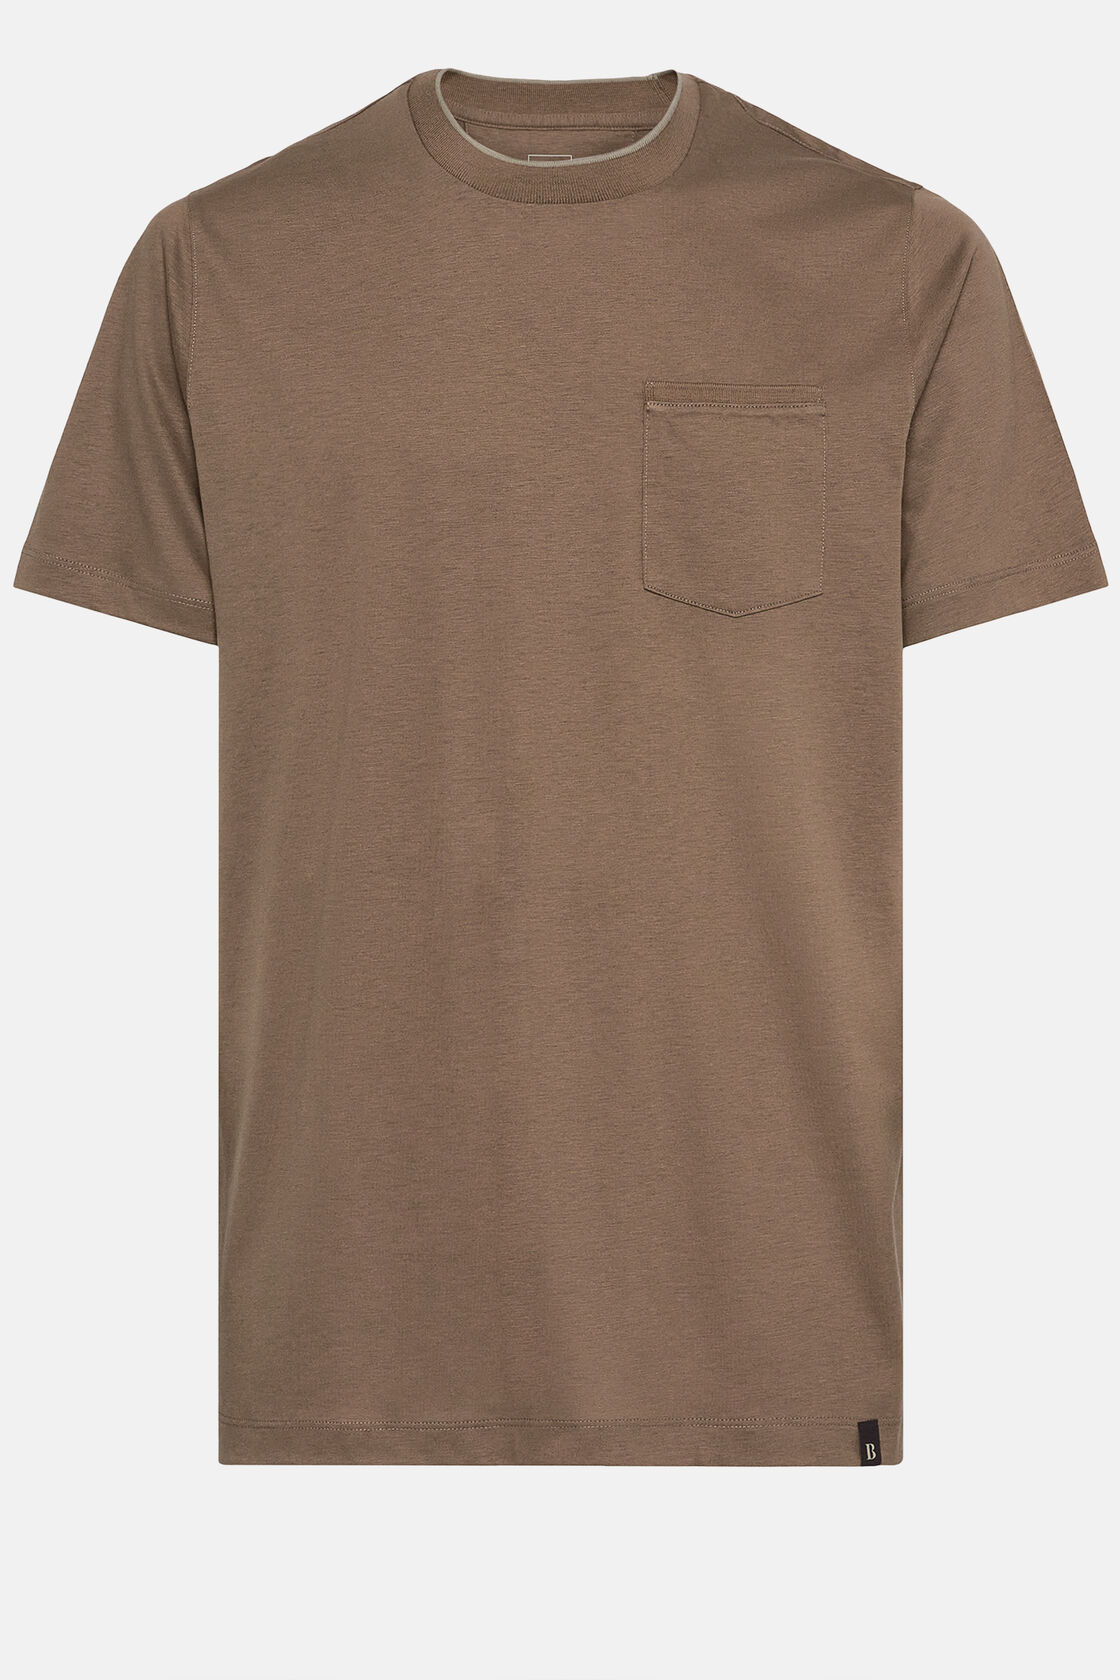 T-Shirt in Cotton and Tencel Jersey, Brown, hi-res